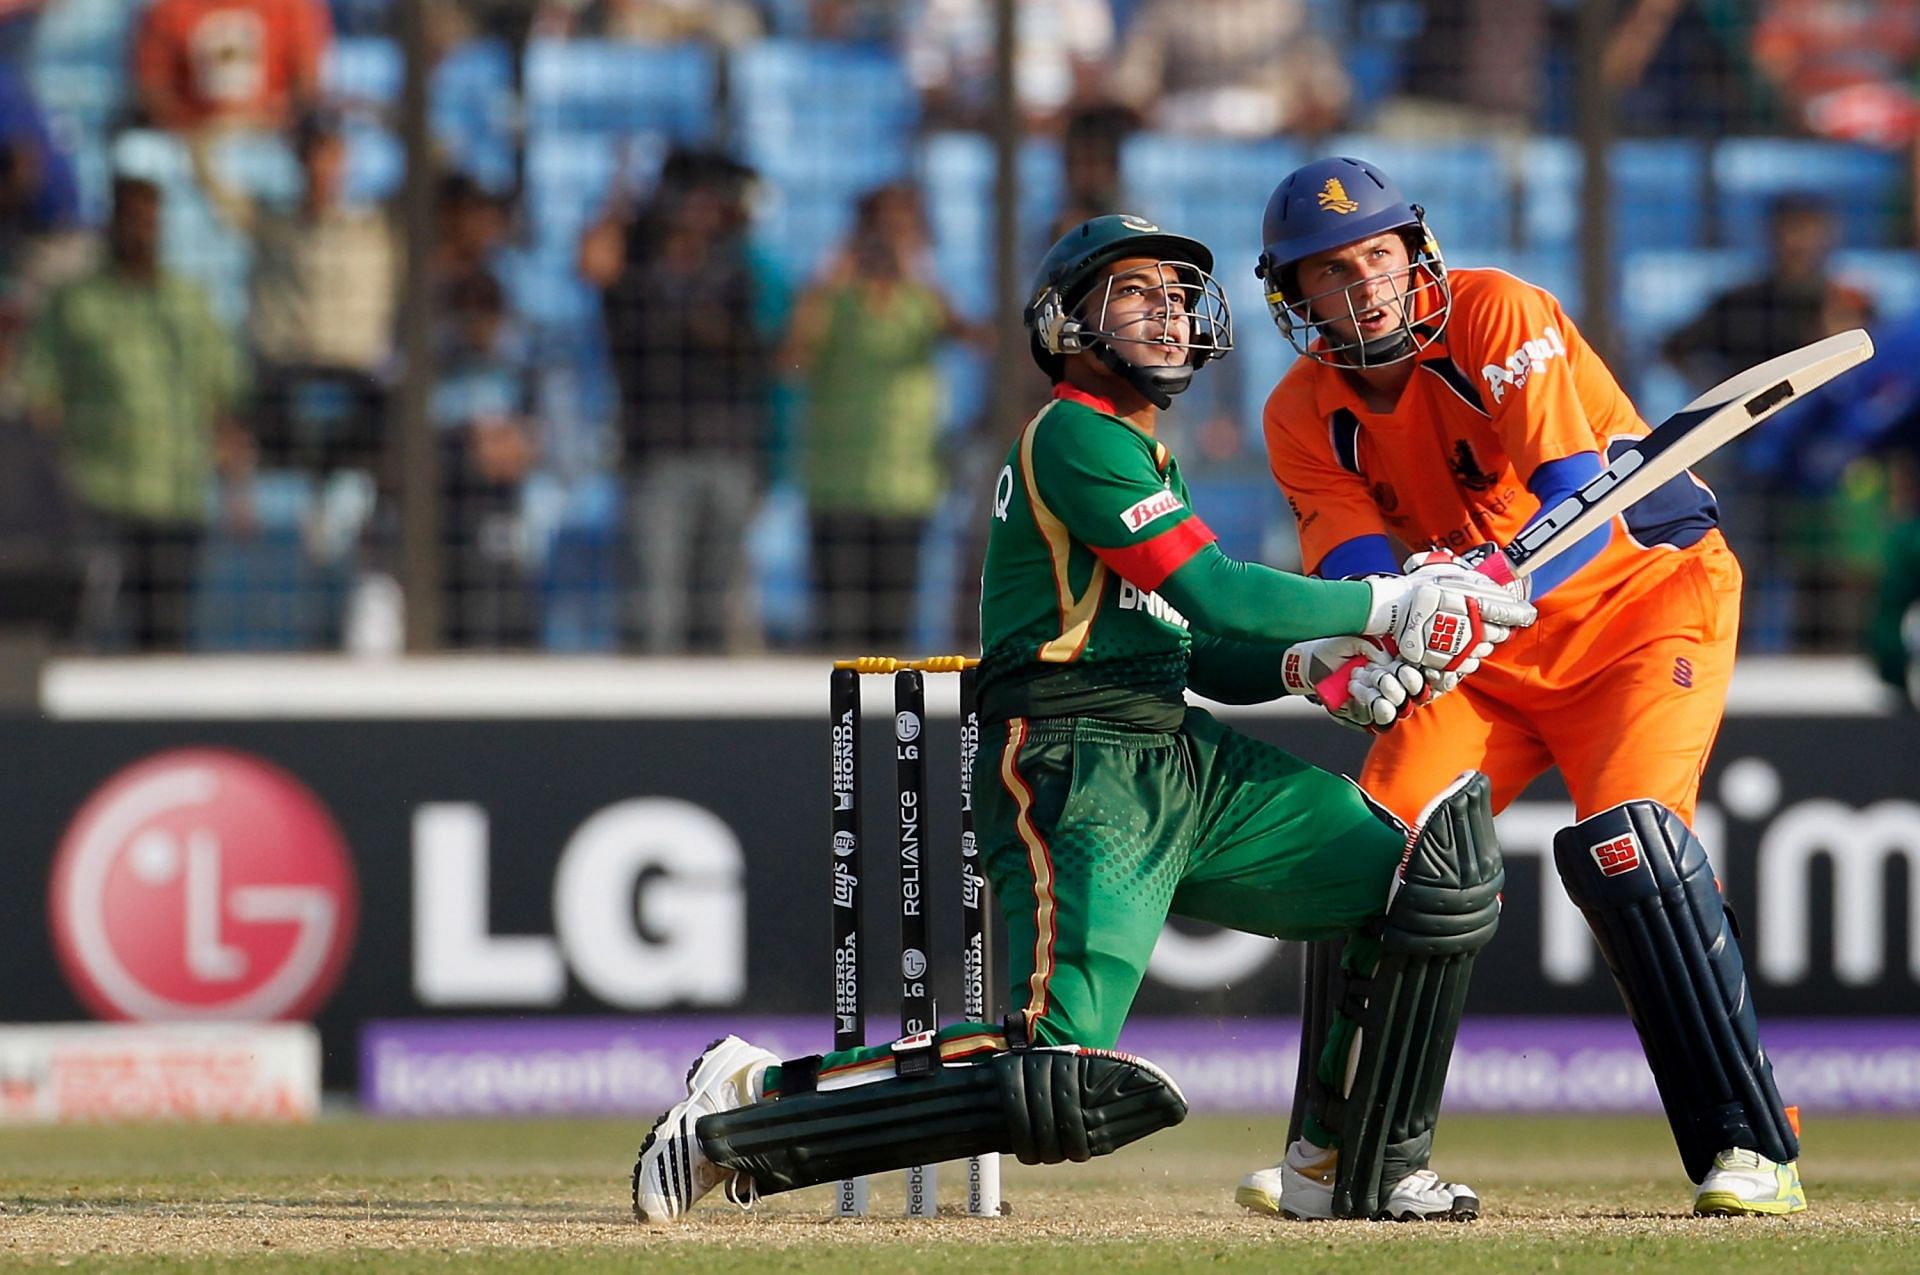 Mushfiqur Rahim hits the winning runs during the 2011 ICC Cricket World Cup Group B match against the Netherlands. (Pic: Getty Images)